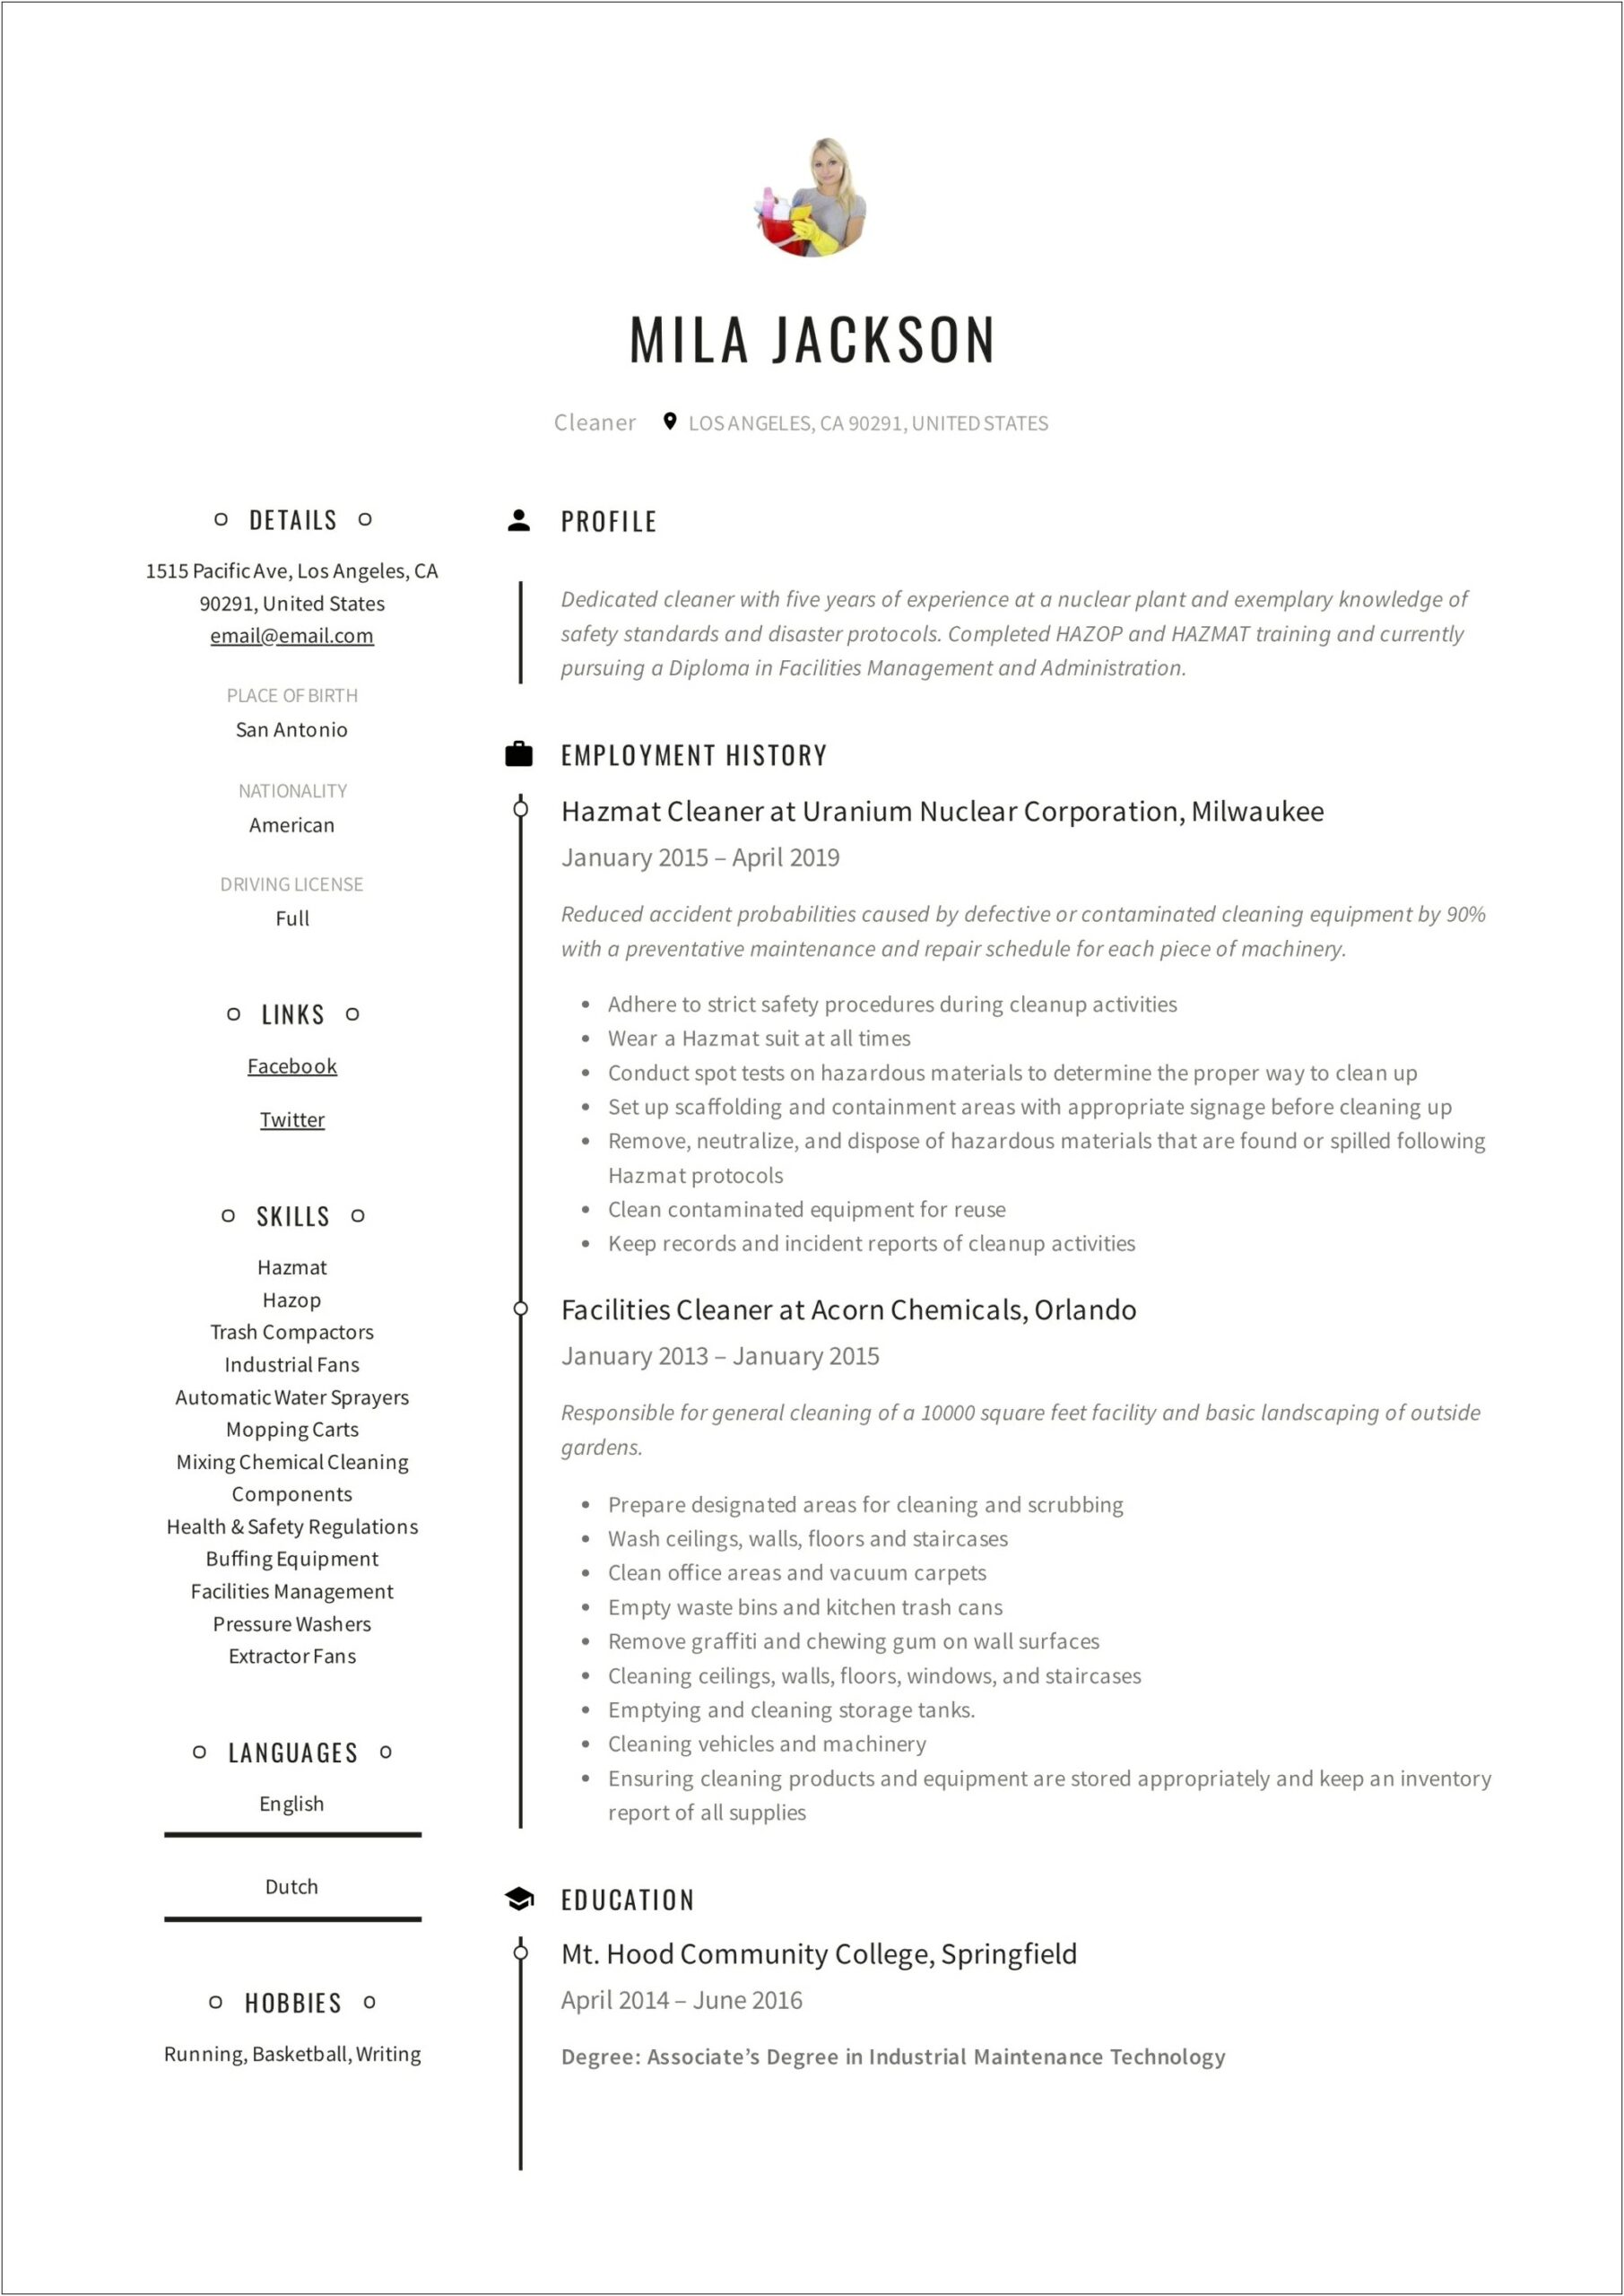 Sample Resume Objective For Car Washer